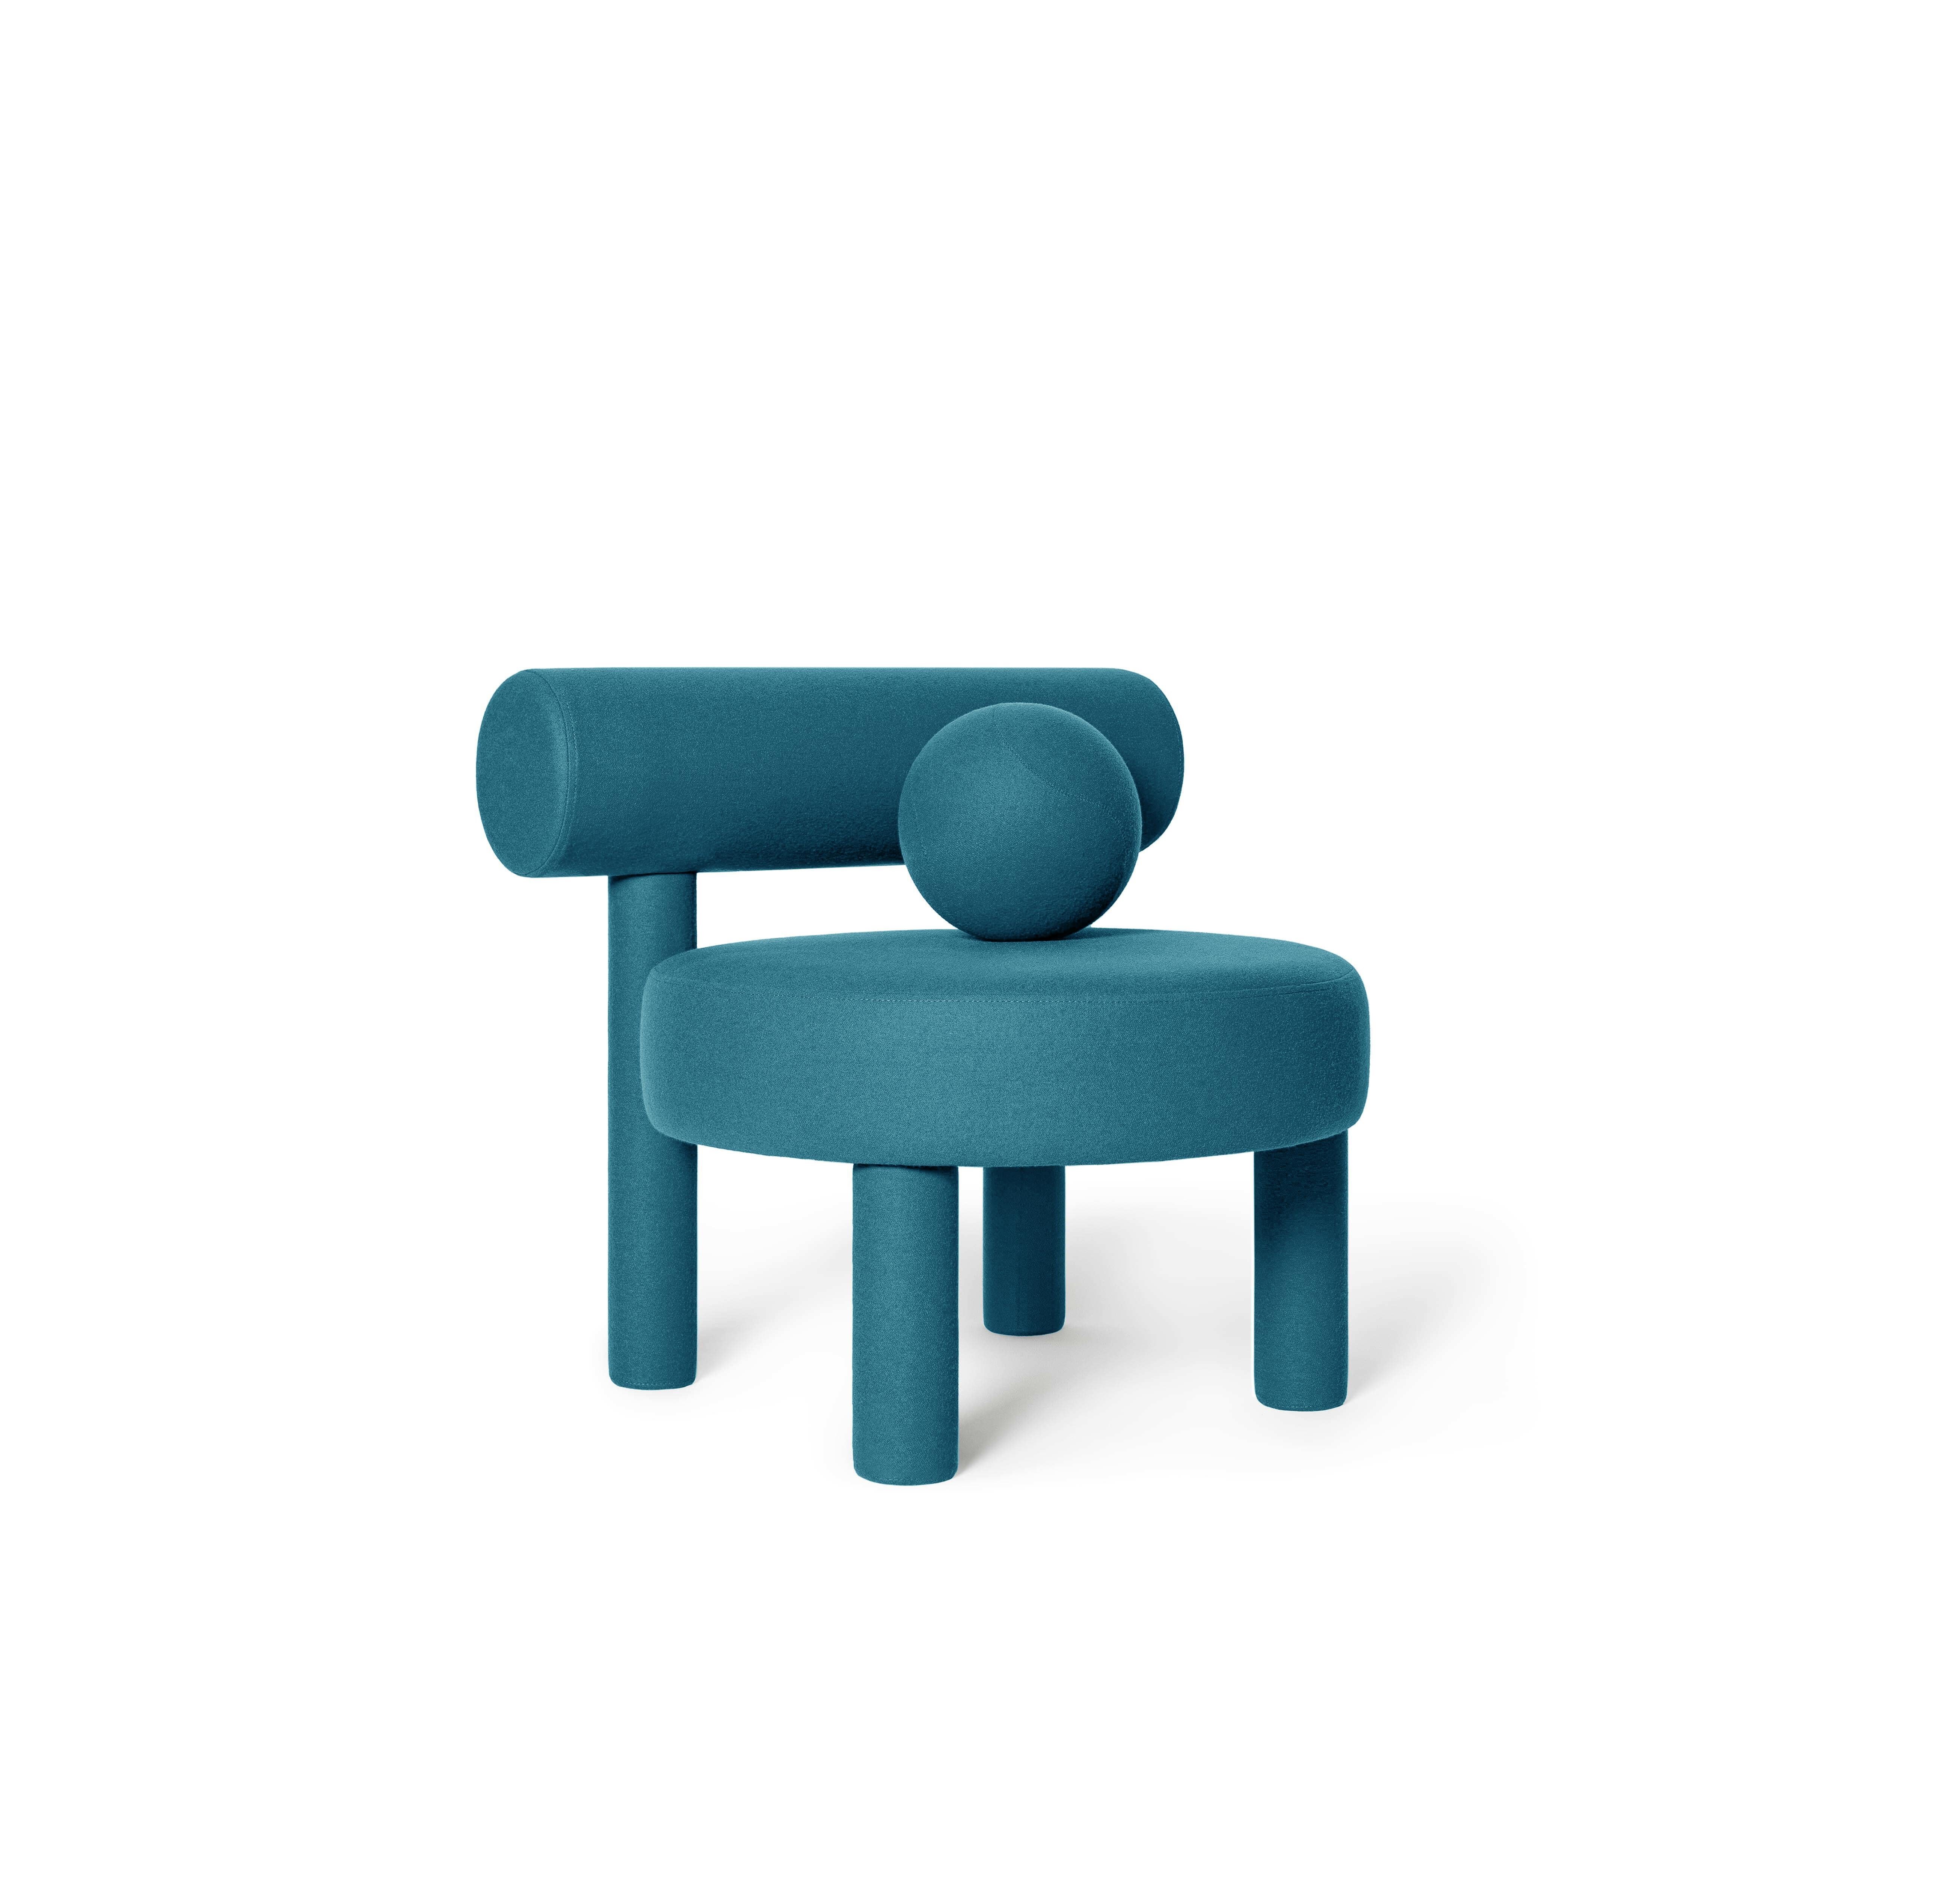 Organic Modern Modern Low Chair 'Gropius CS1' by Noom, Turquoise For Sale